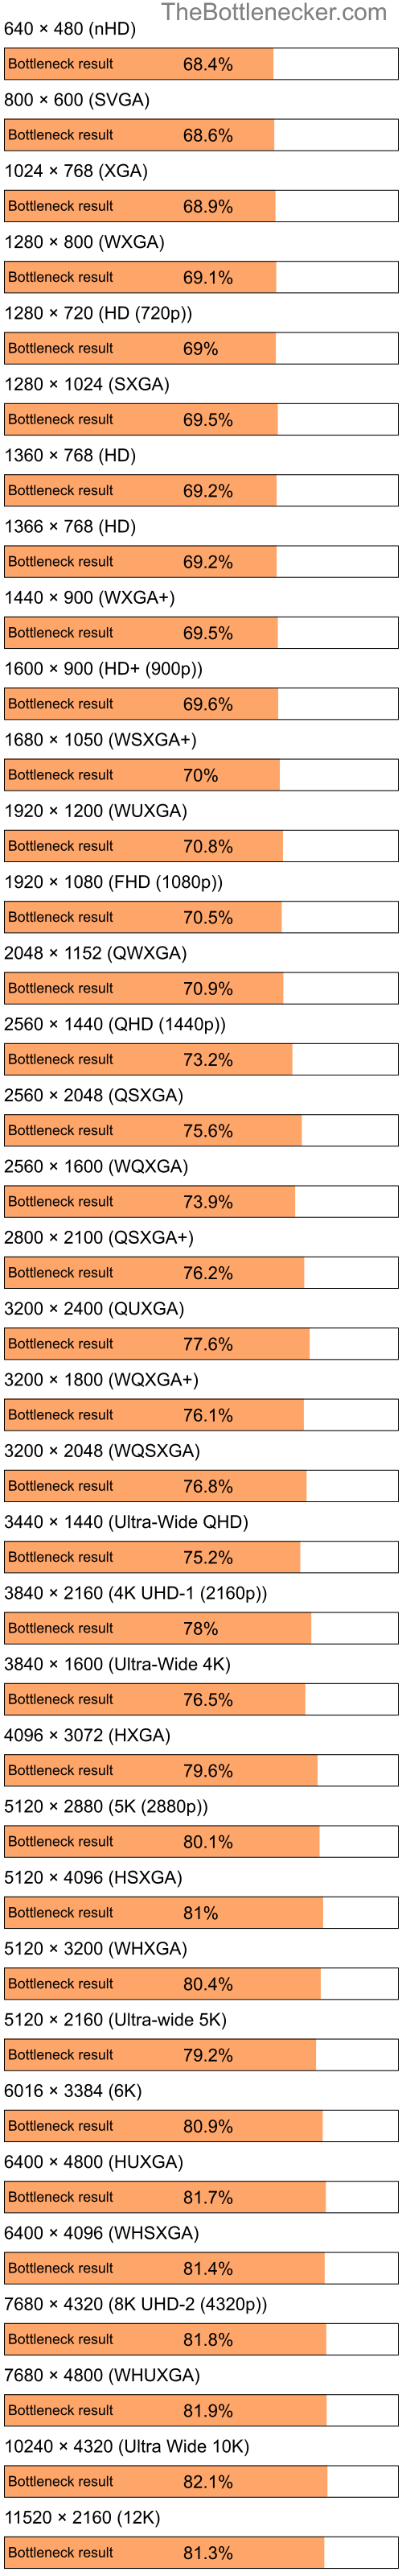 Bottleneck results by resolution for Intel Atom Z520 and AMD Mobility Radeon X1350 in Processor Intense Tasks